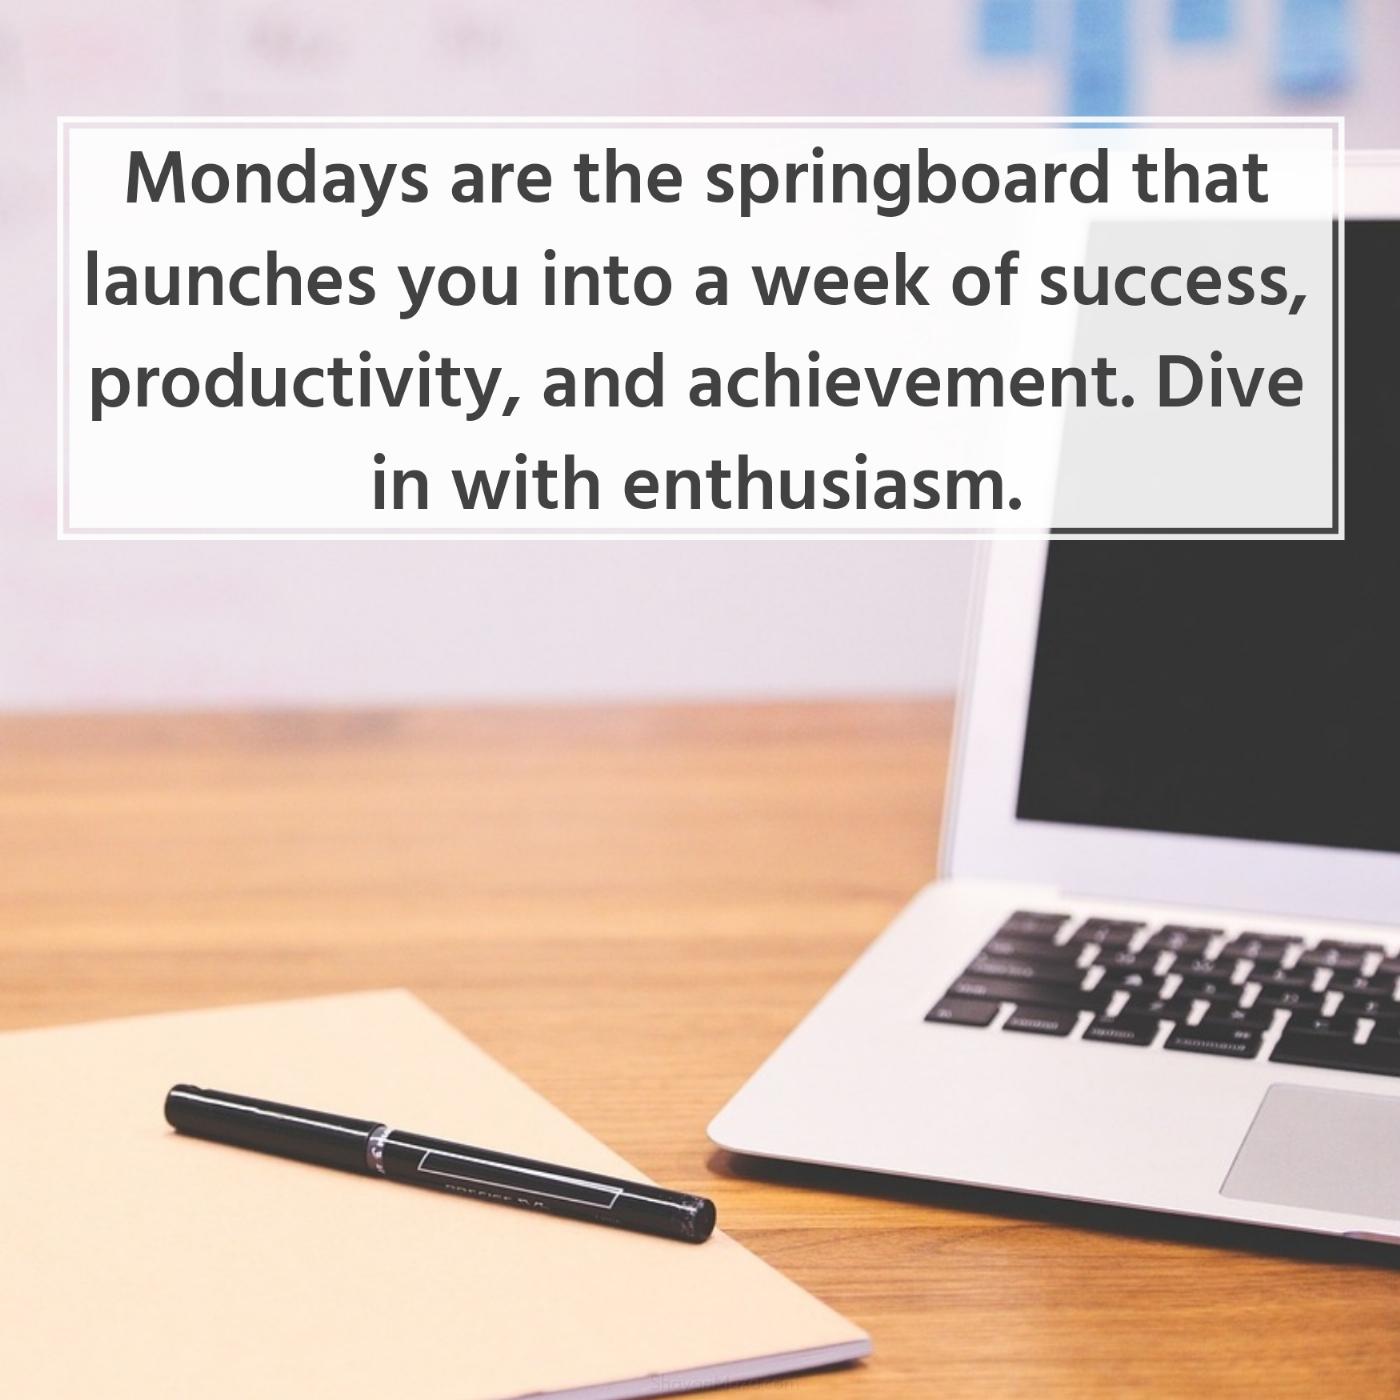 Mondays are the springboard that launches you into a week